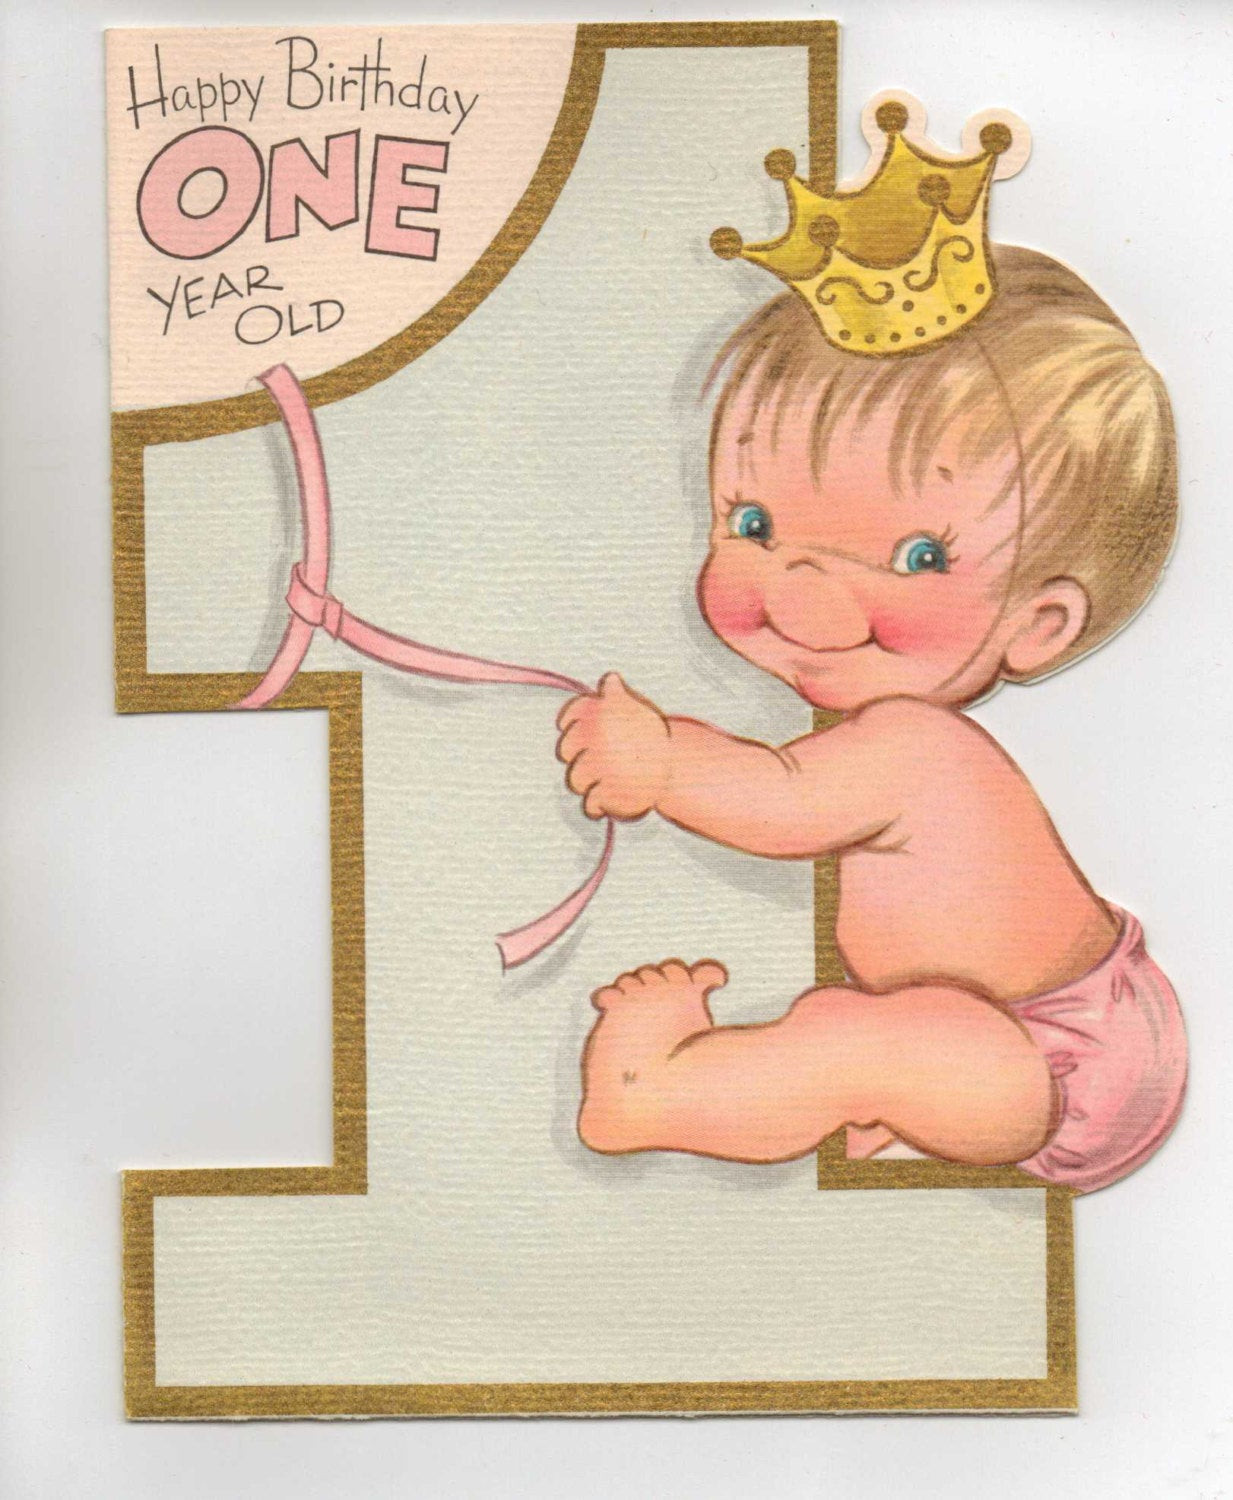 1 Year Old Birthday Quotes
 1950s Happy Birthday e Year Old